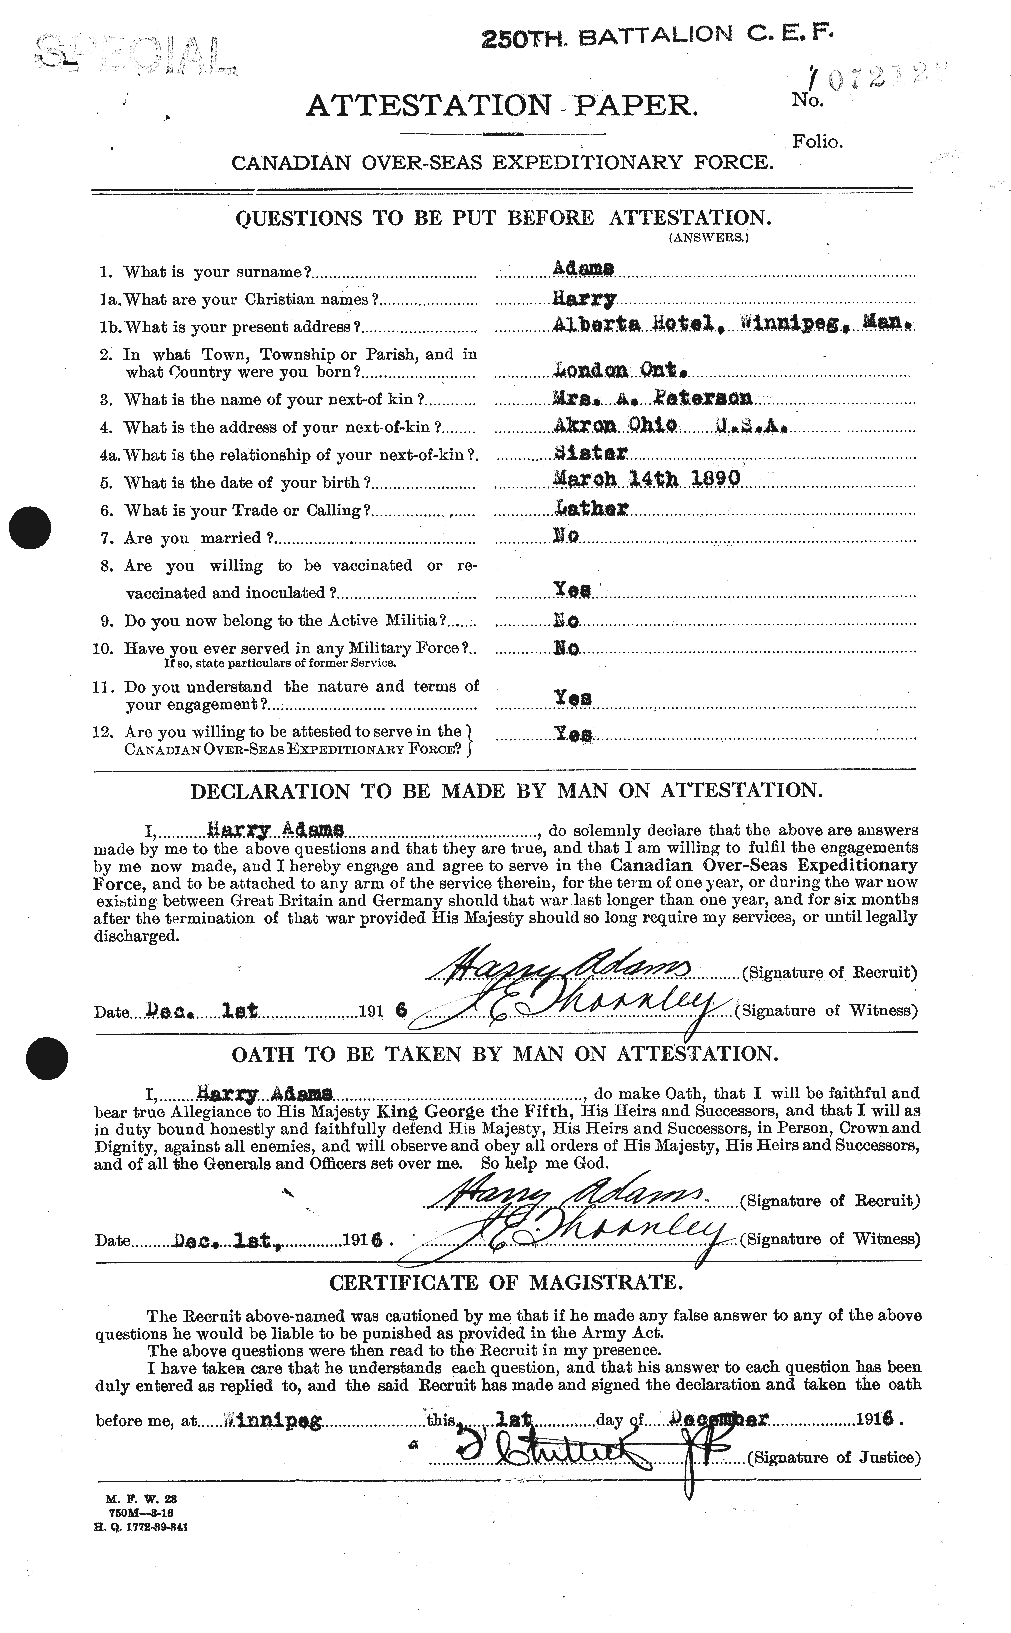 Personnel Records of the First World War - CEF 203157a